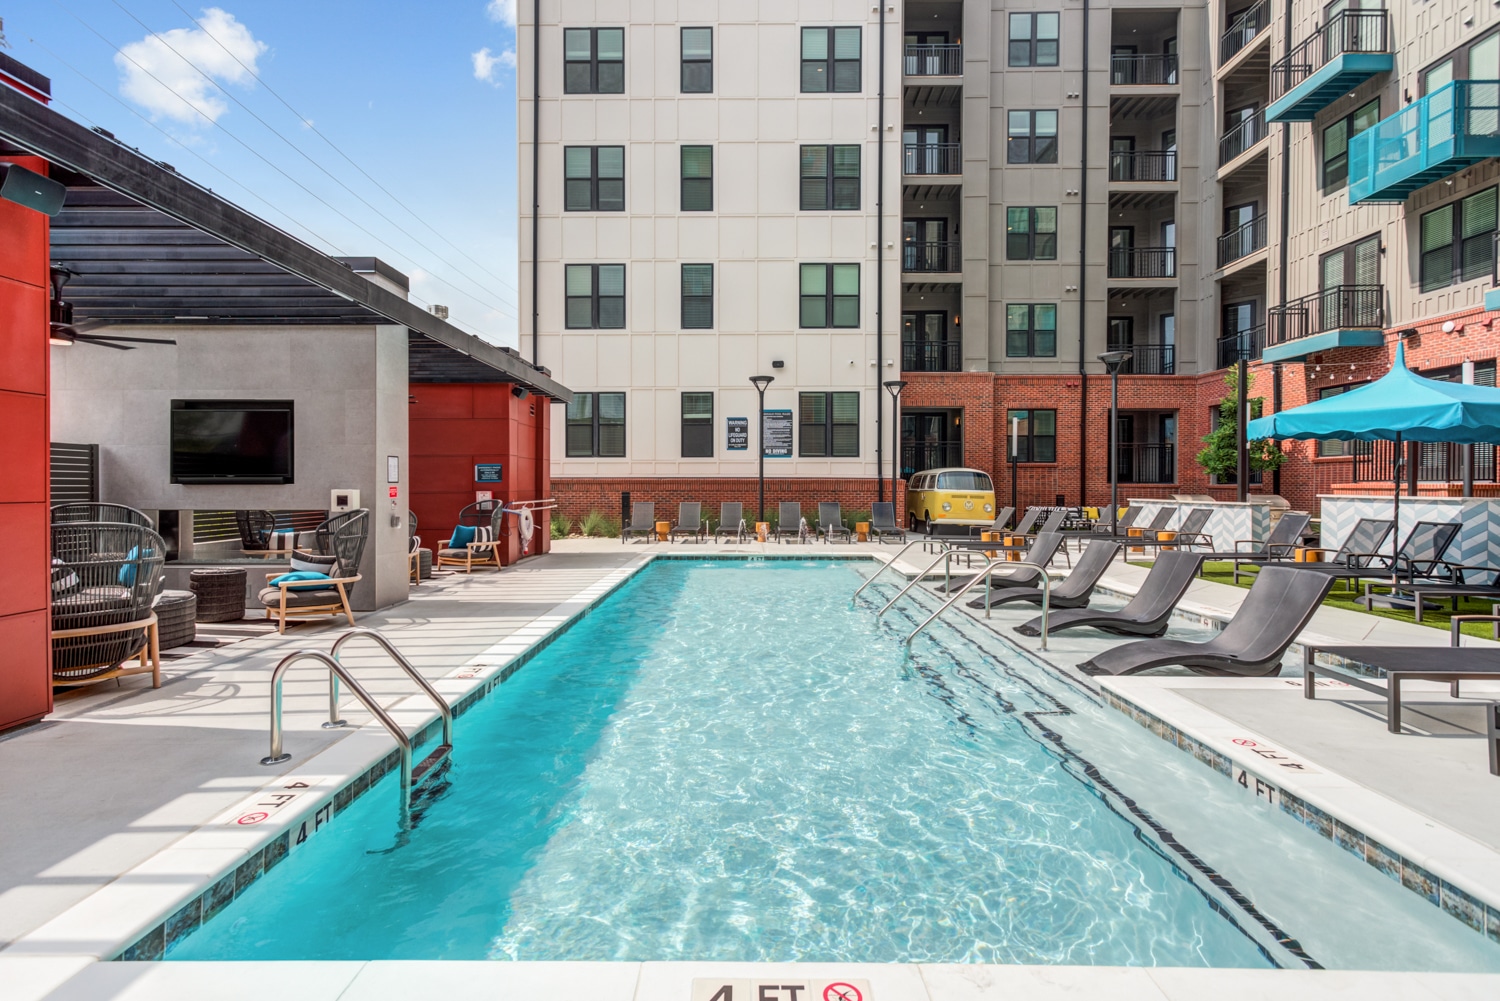 Community pool with ample seating in Margaux Midtown's community